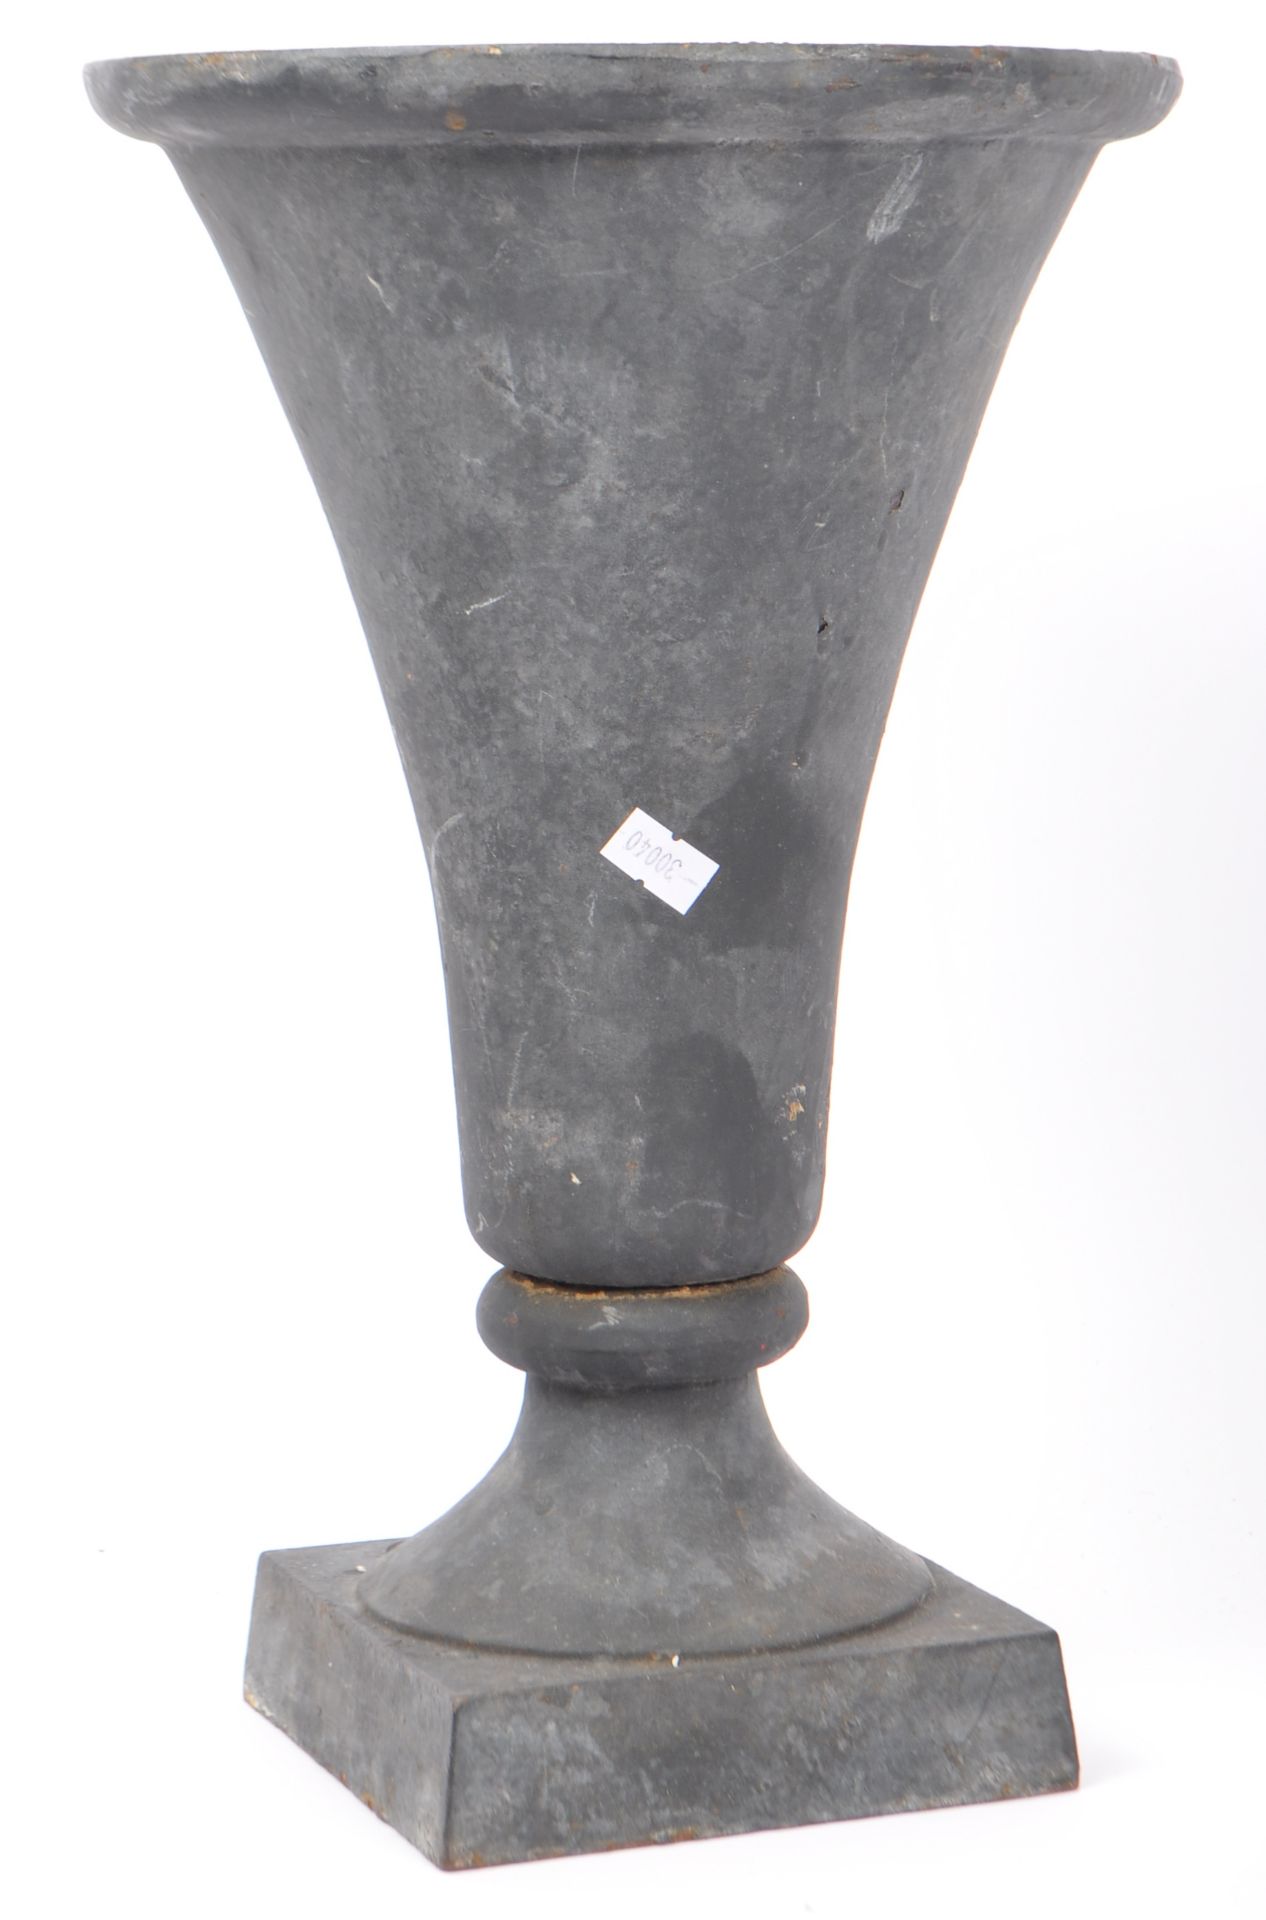 PAIR OF EARLY 20TH CENTURY CAST IRON SPILL VASES - Image 2 of 3